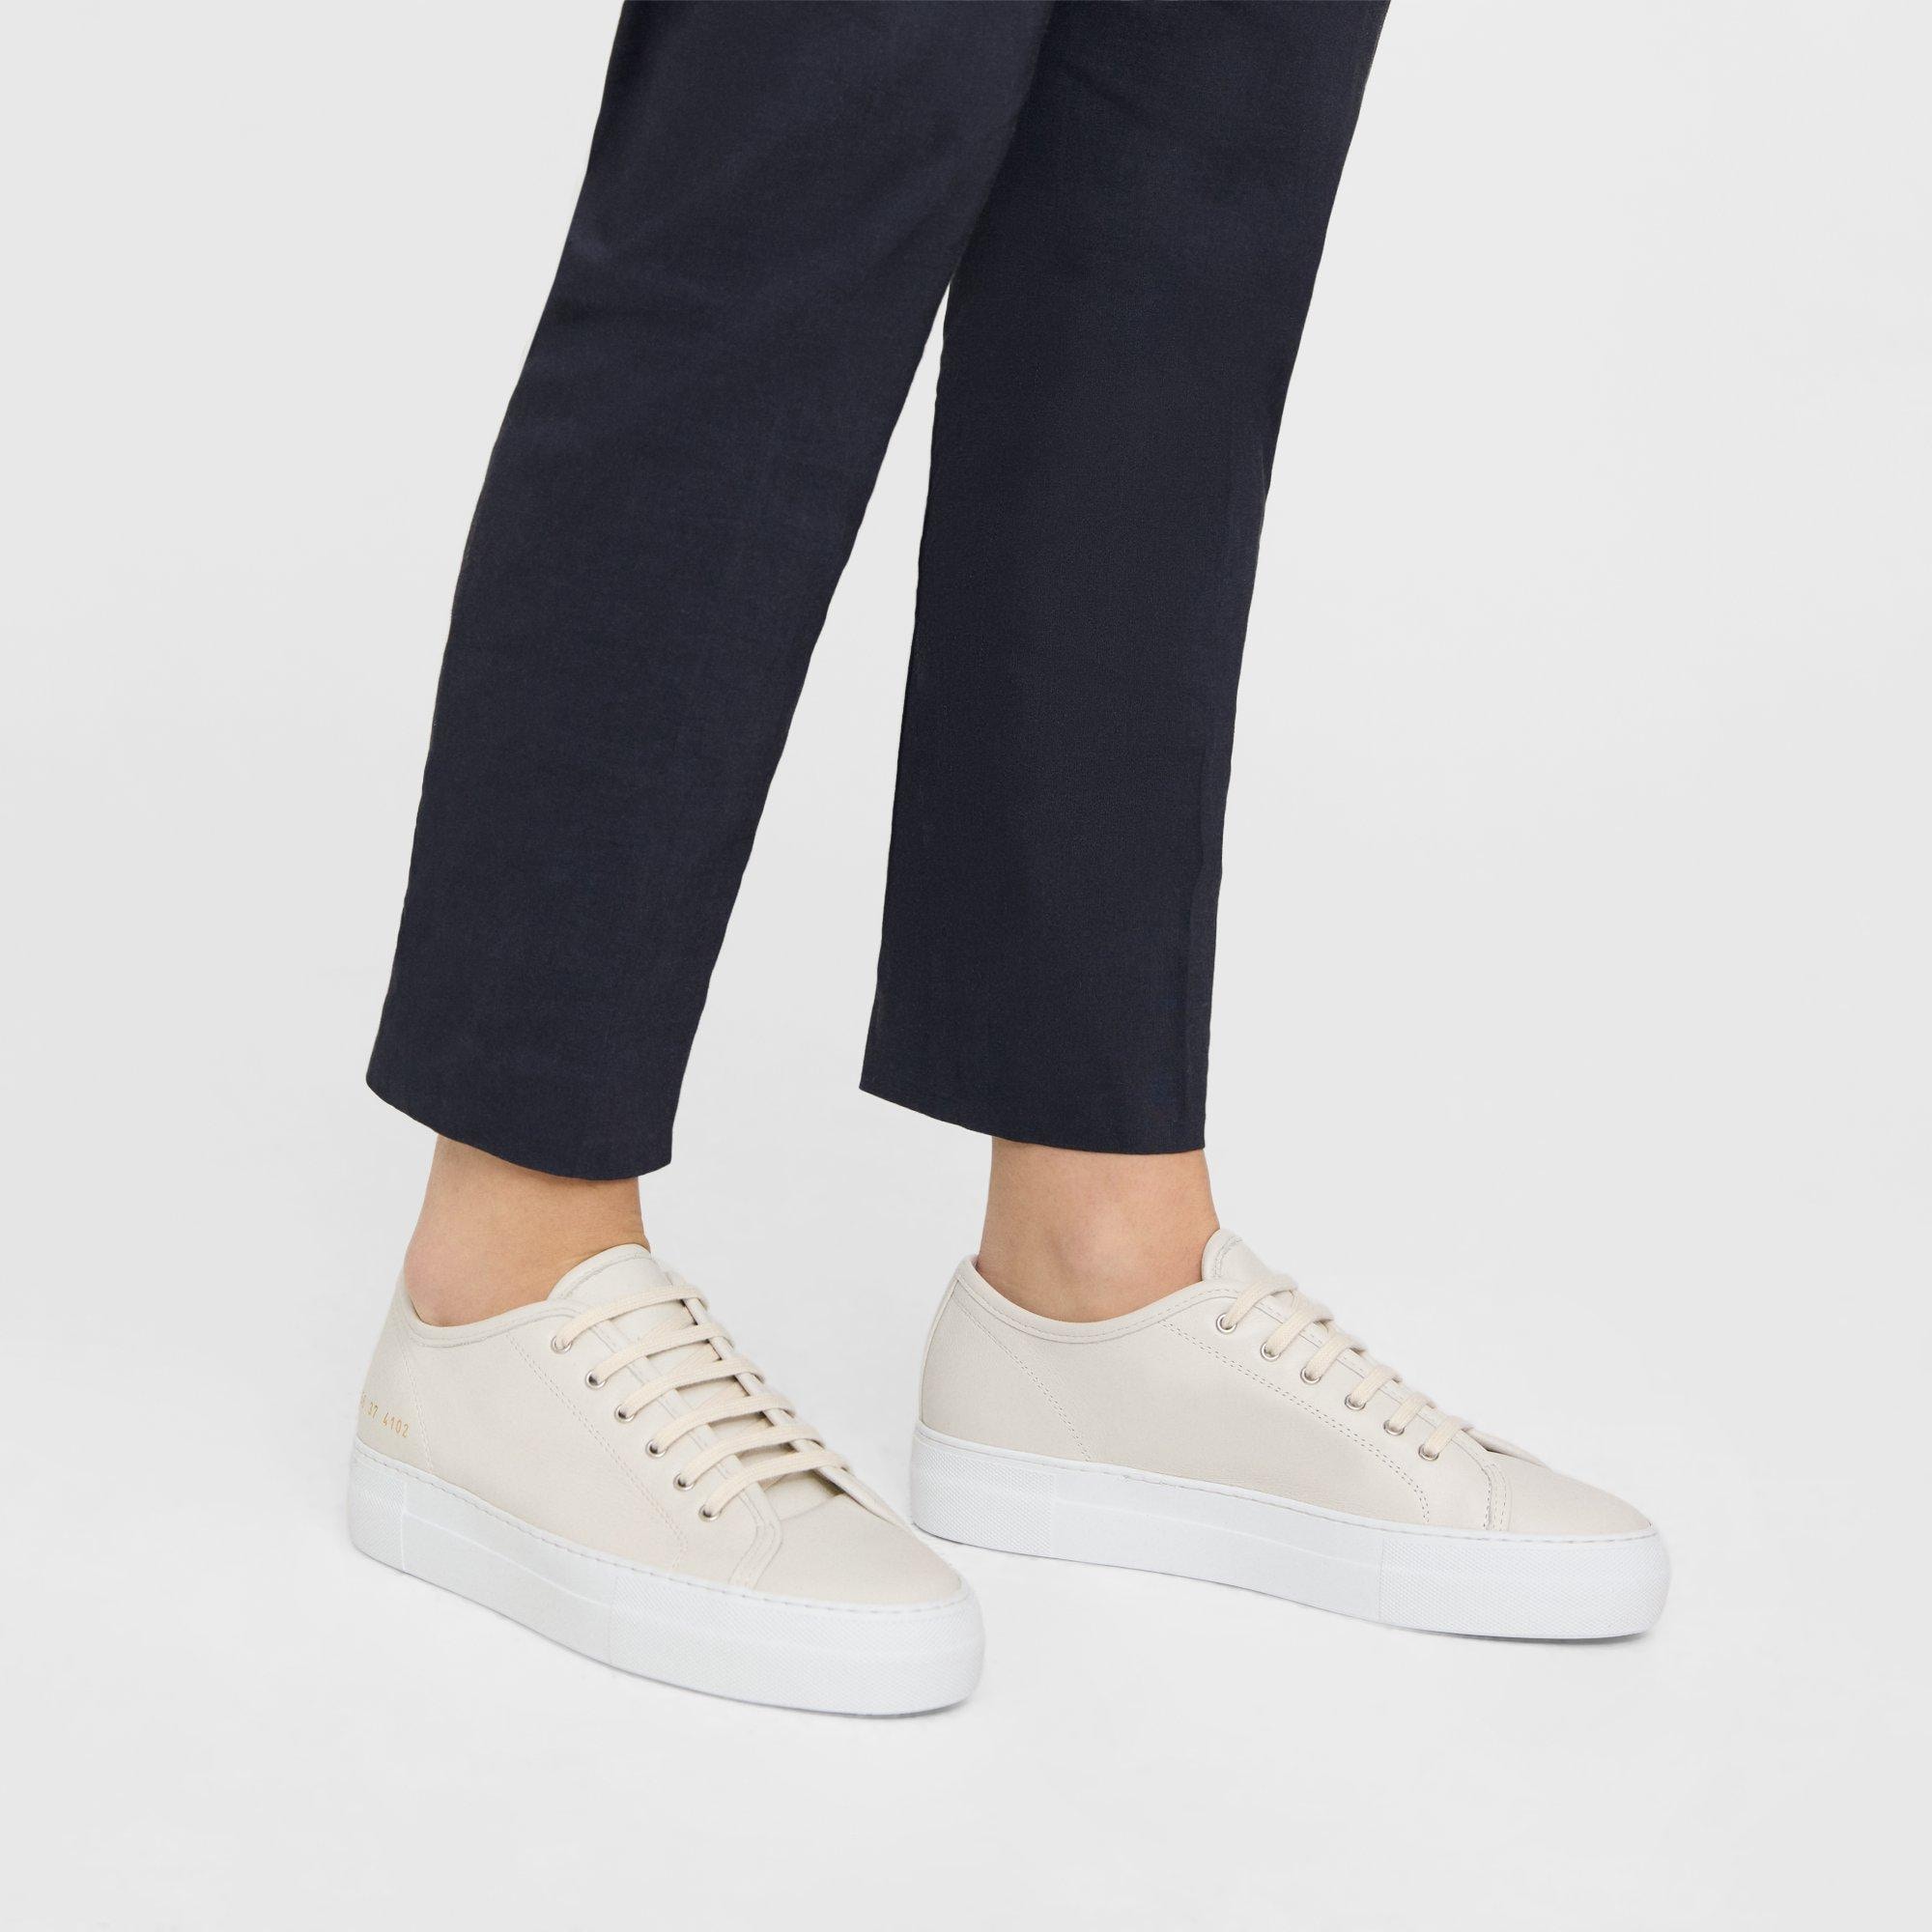 Theory Common Projects Women's Tournament Low-Top Super Platform Sneakers